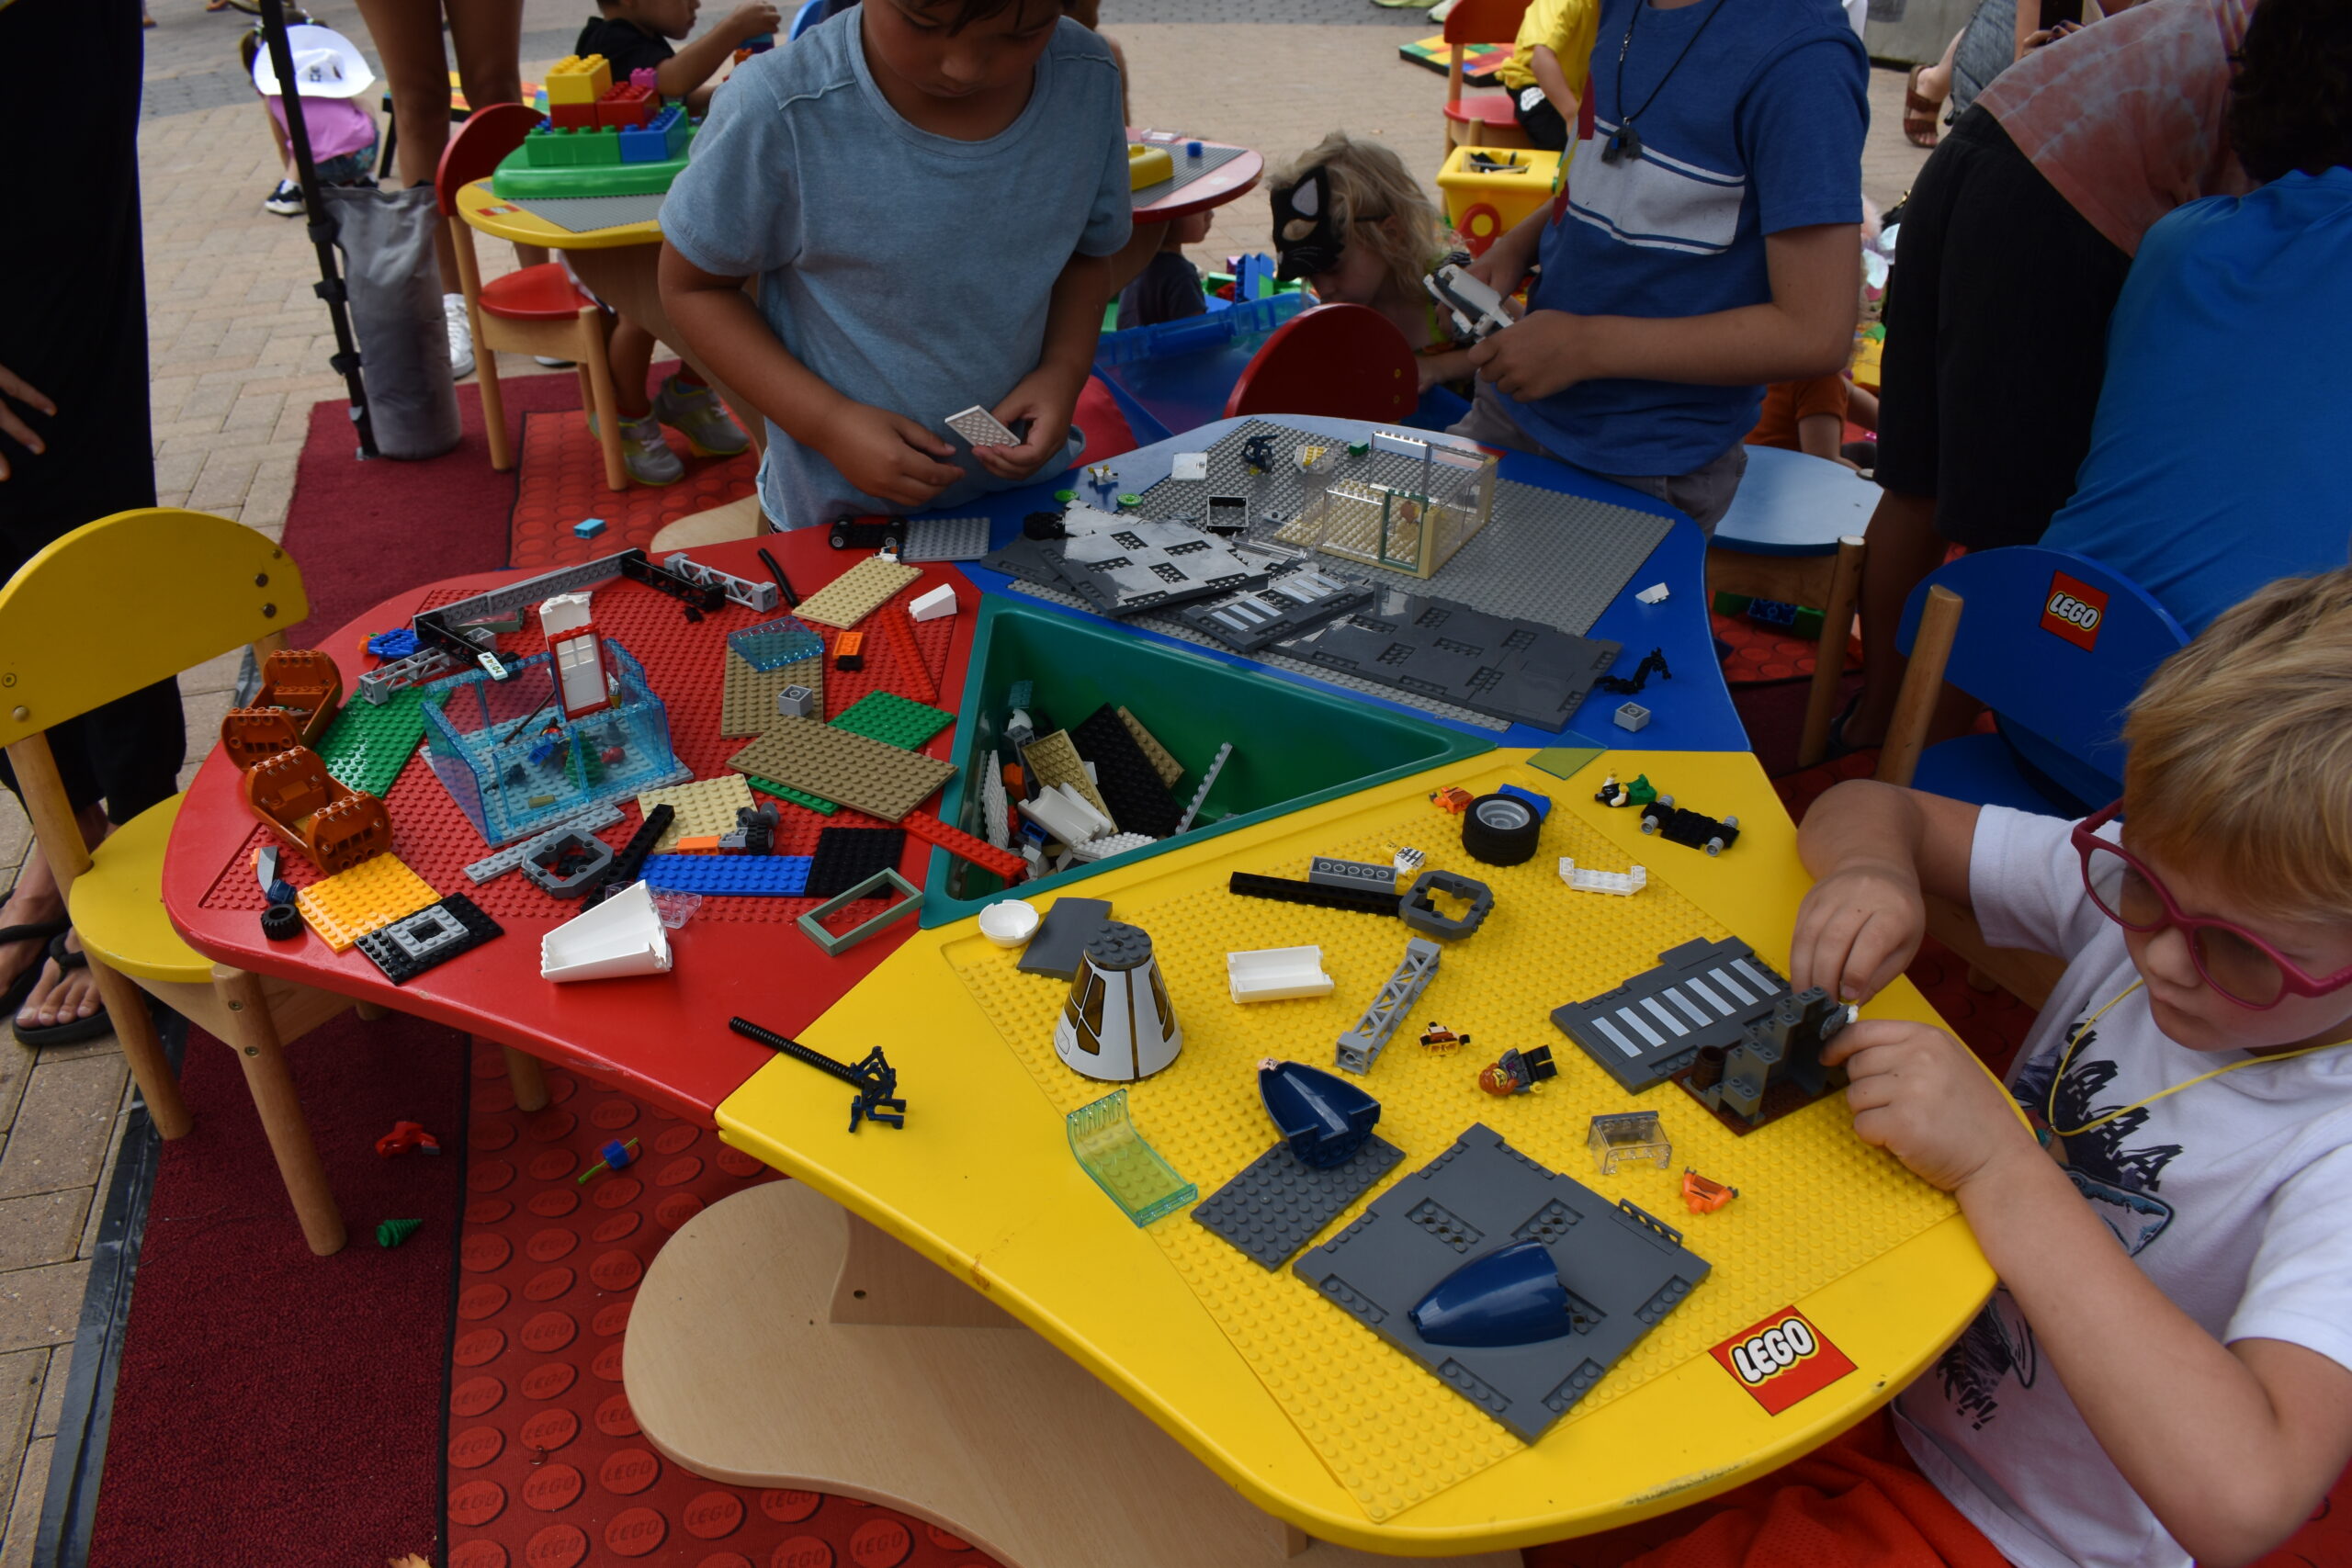 Children enjoying creating models of space ships and buildings from LEGOS®